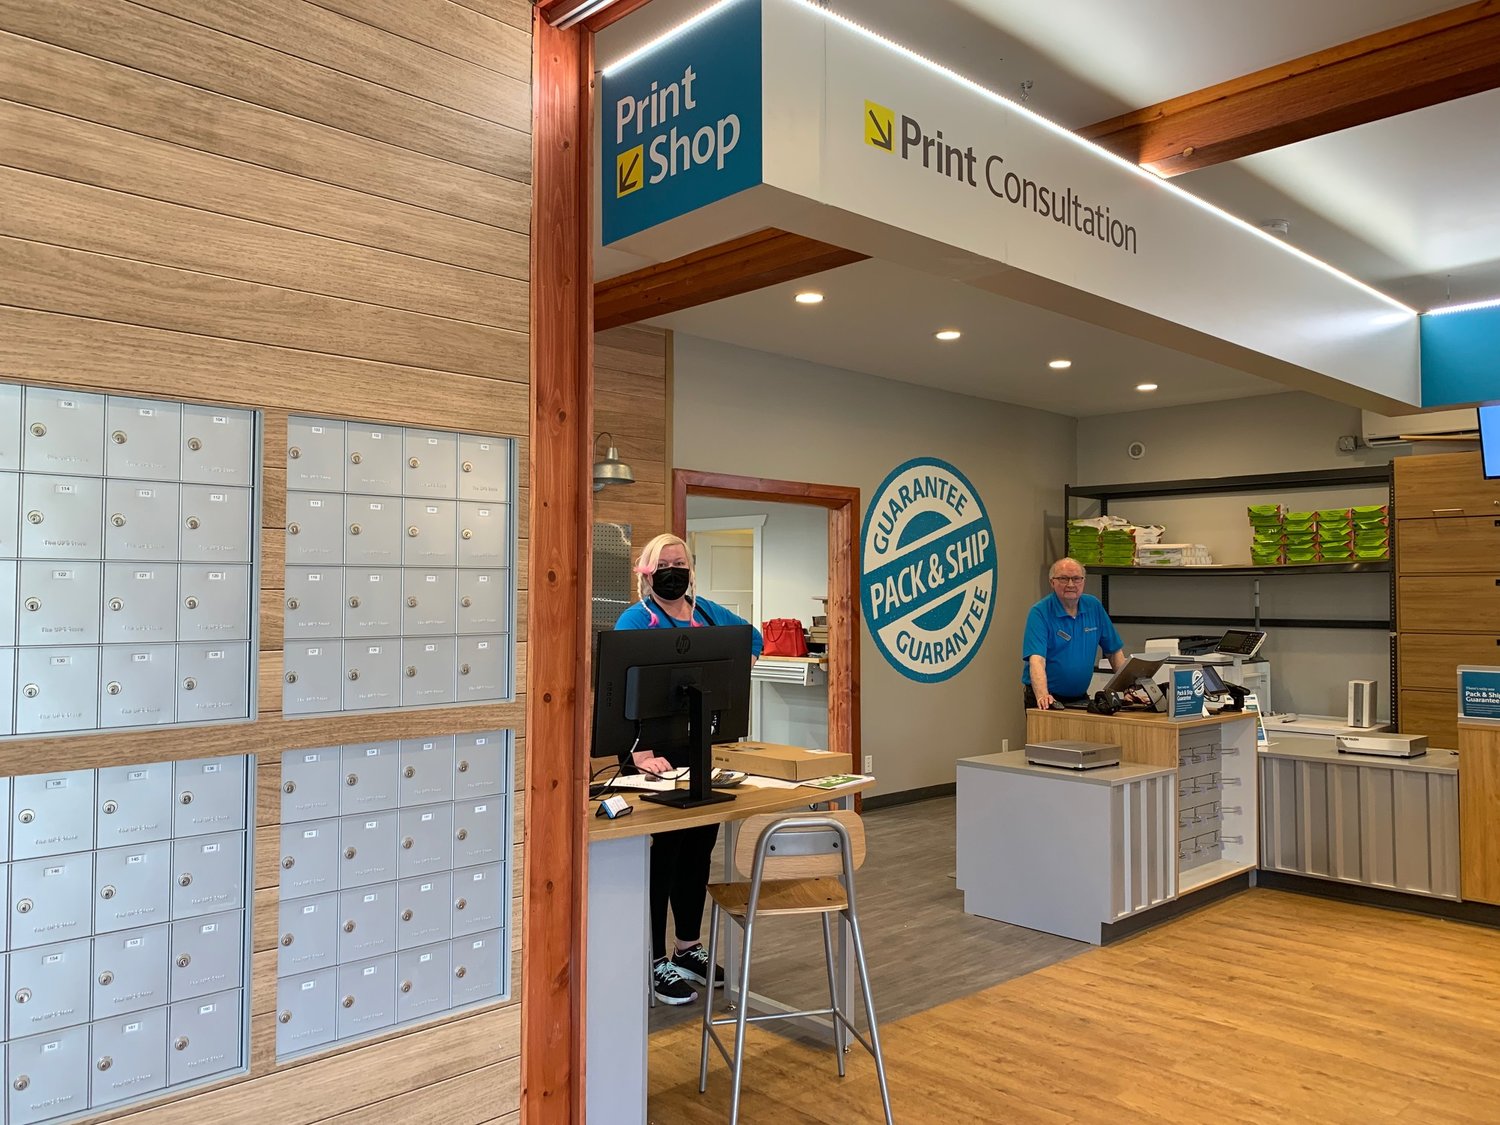 The Point Roberts UPS Store is now open on Gulf Road across from the post office.
Currently hours are 10 a.m. until 4 p.m. Monday - Friday,  Saturday 10 a.m.- 2 p.m. and closed Sundays. Mailbox access is open 24 hours. A business center is available with shipping supplies, print shop, notary and shredding. Melissa and Allan are ready to help.